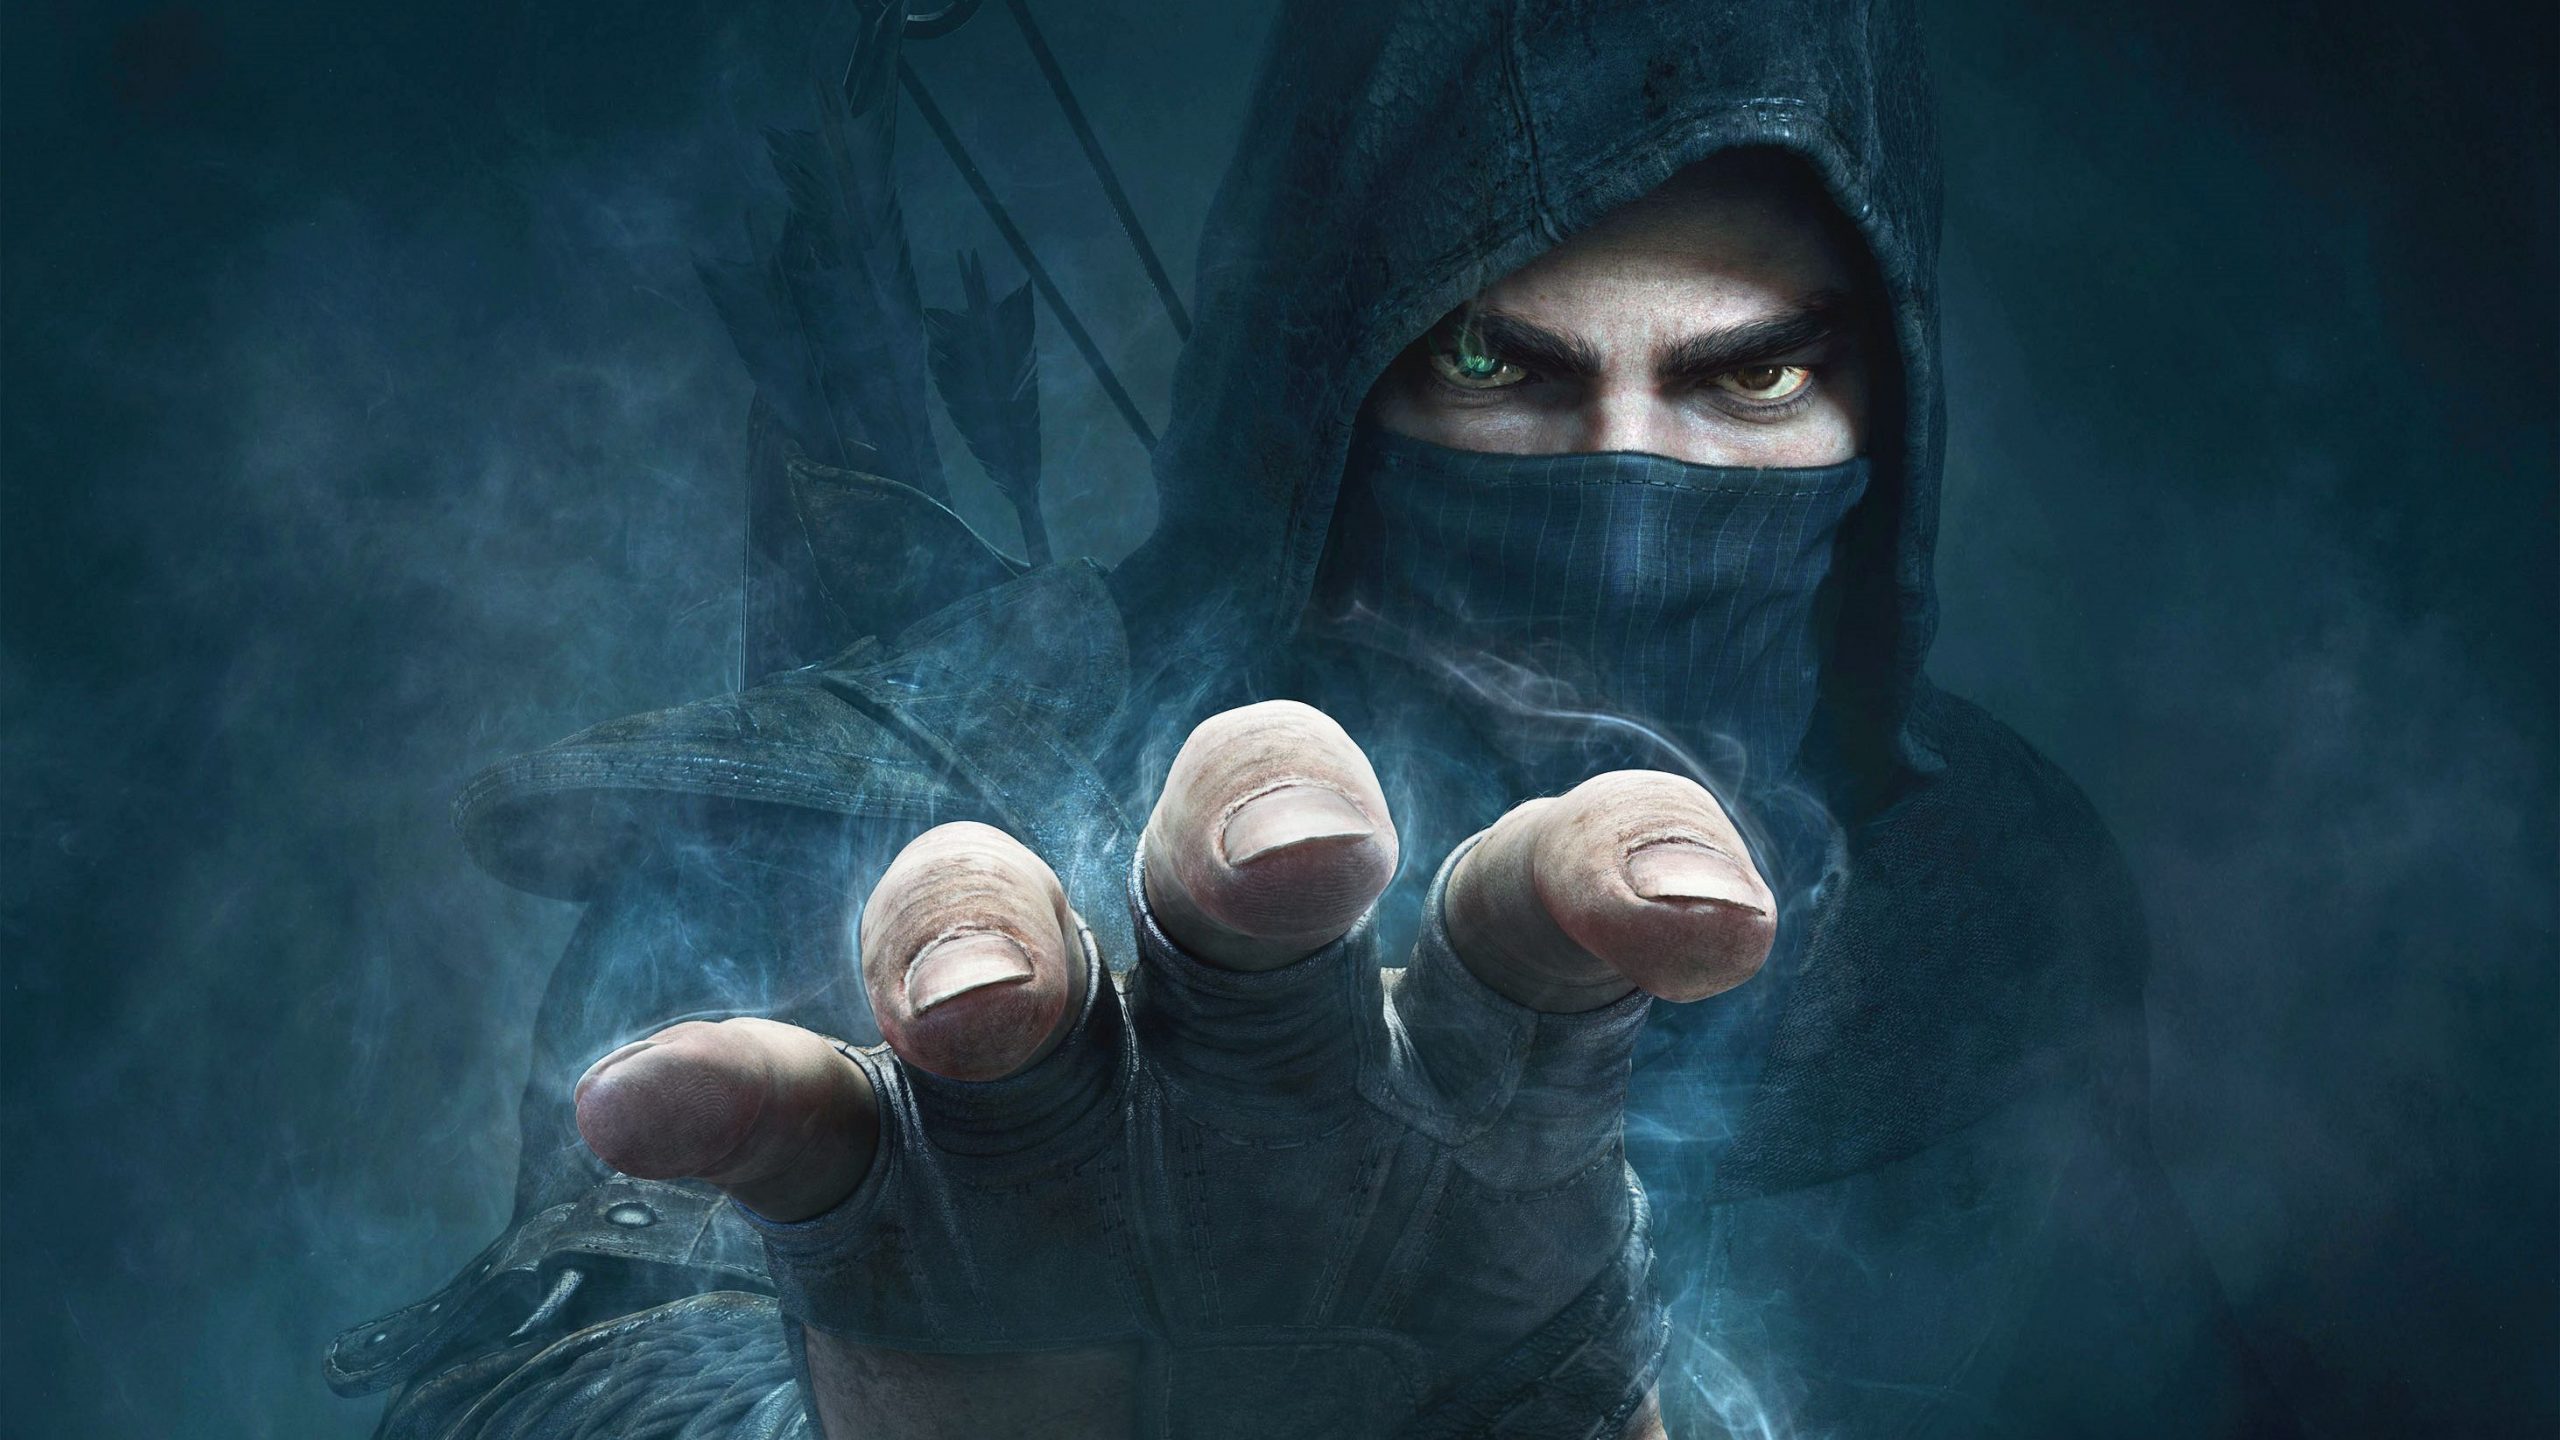 Thief PC Game Latest Version Free Download